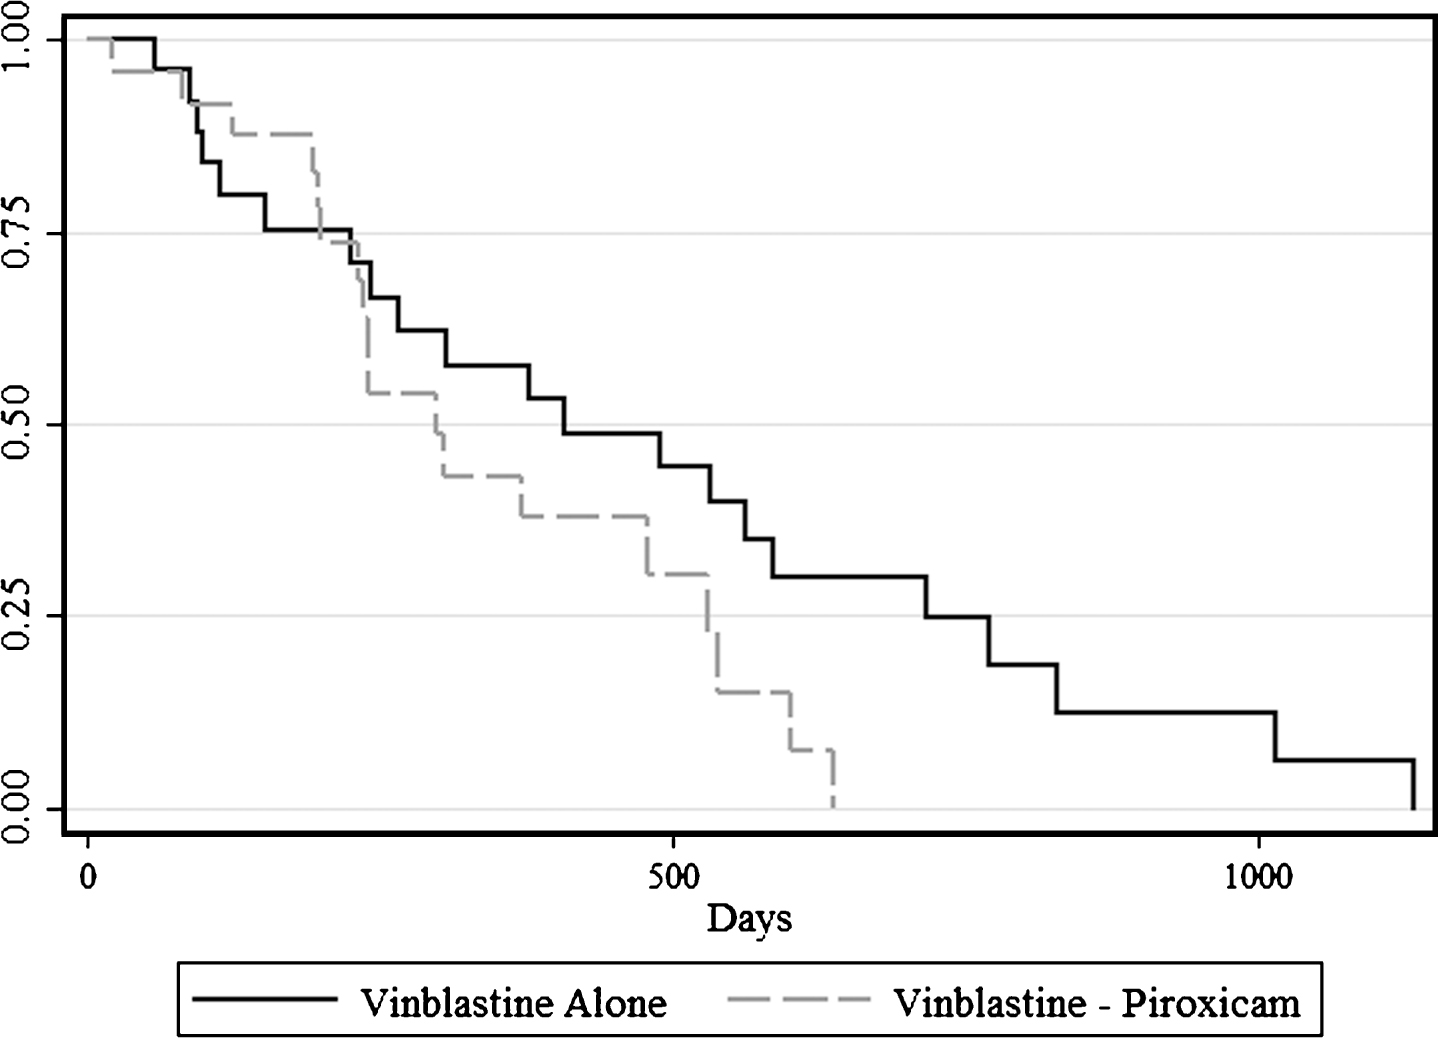 Overall survival of dogs receiving vinblastine alone and dogs receiving vinblastine and piroxicam simultaneously. The median survival was 407 days in dogs initially treated with vinblastine alone and 299 days in dogs receiving the combination treatment (P = 0.668).